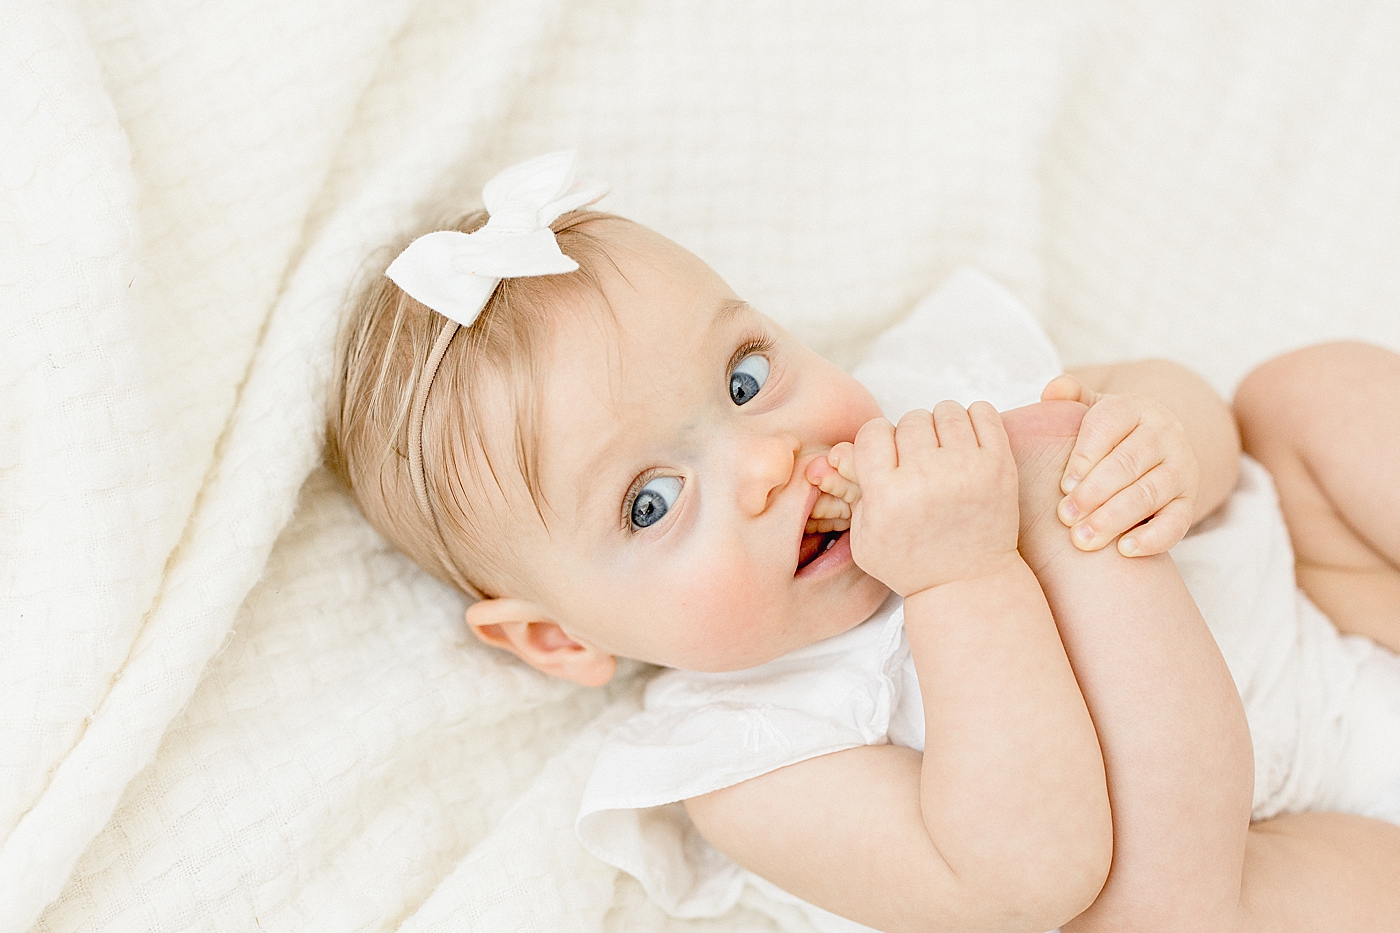 Tampa baby photographer, Brittany Elise, photographs six month old little girl eating her toes! 